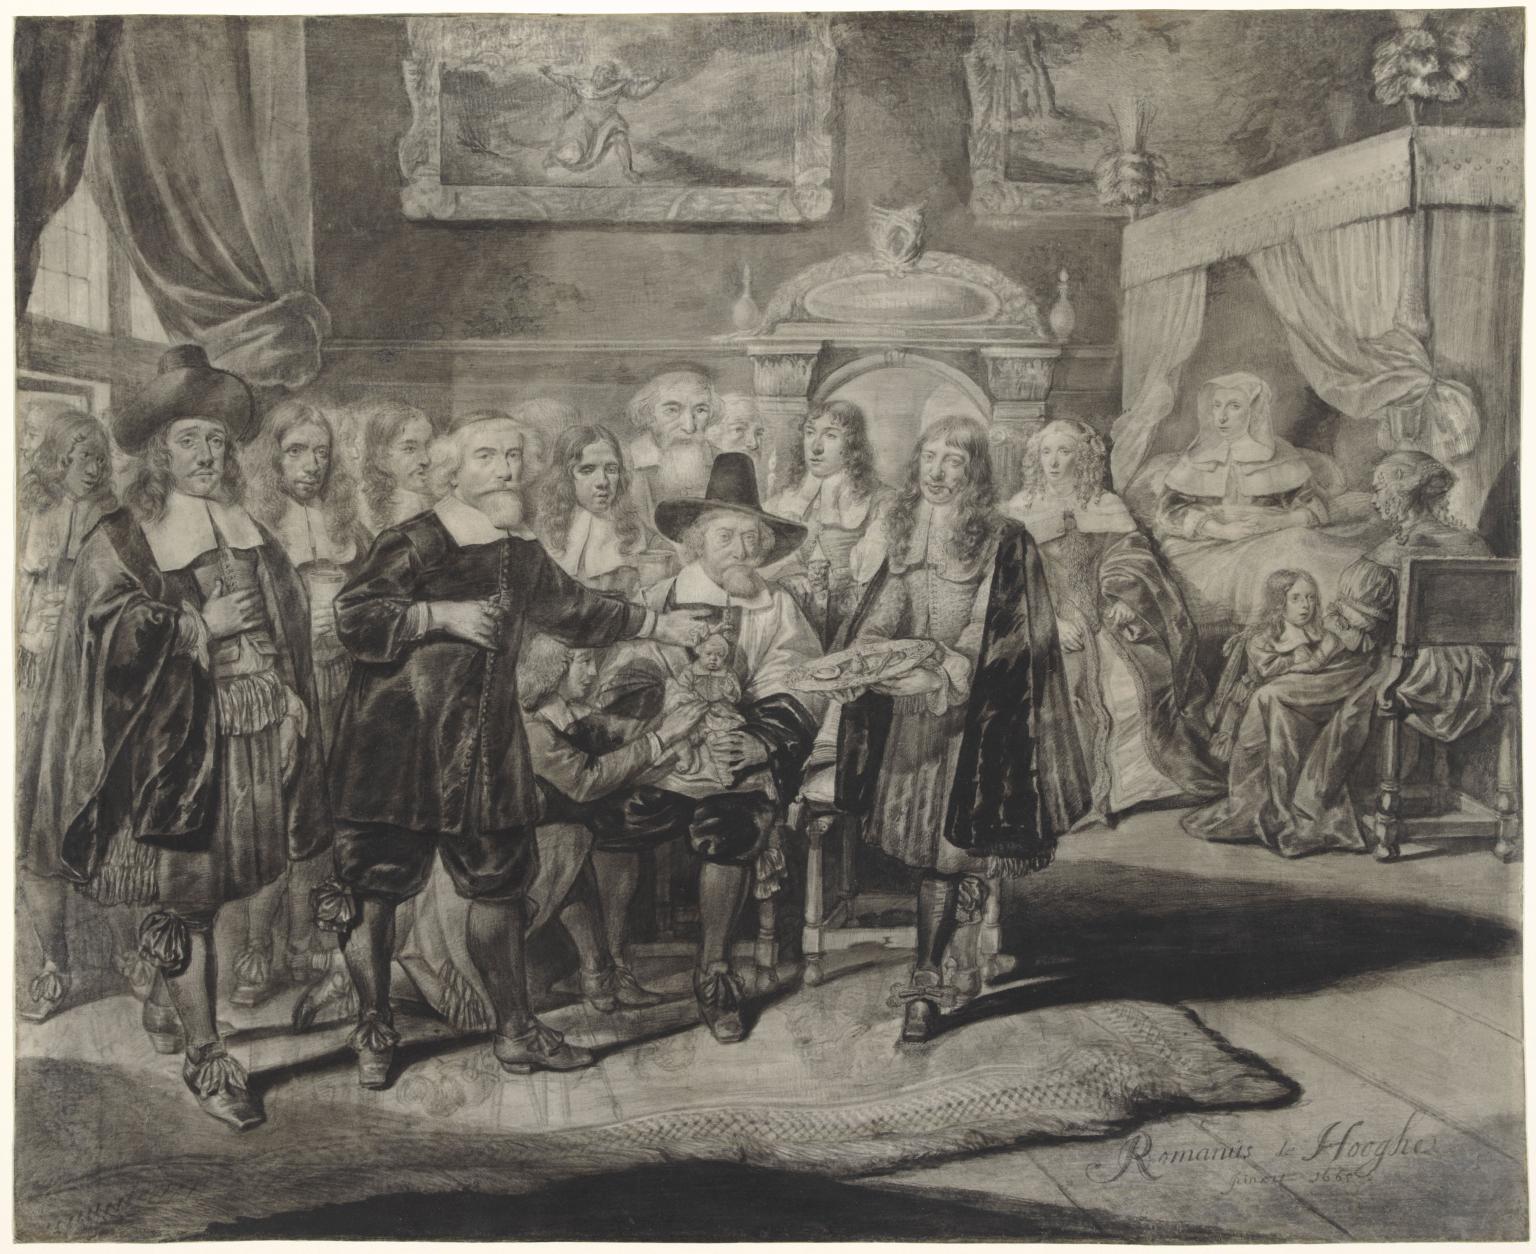 Print of people gathered in bedroom with baby in man's lap in the center, and woman in bed in background.